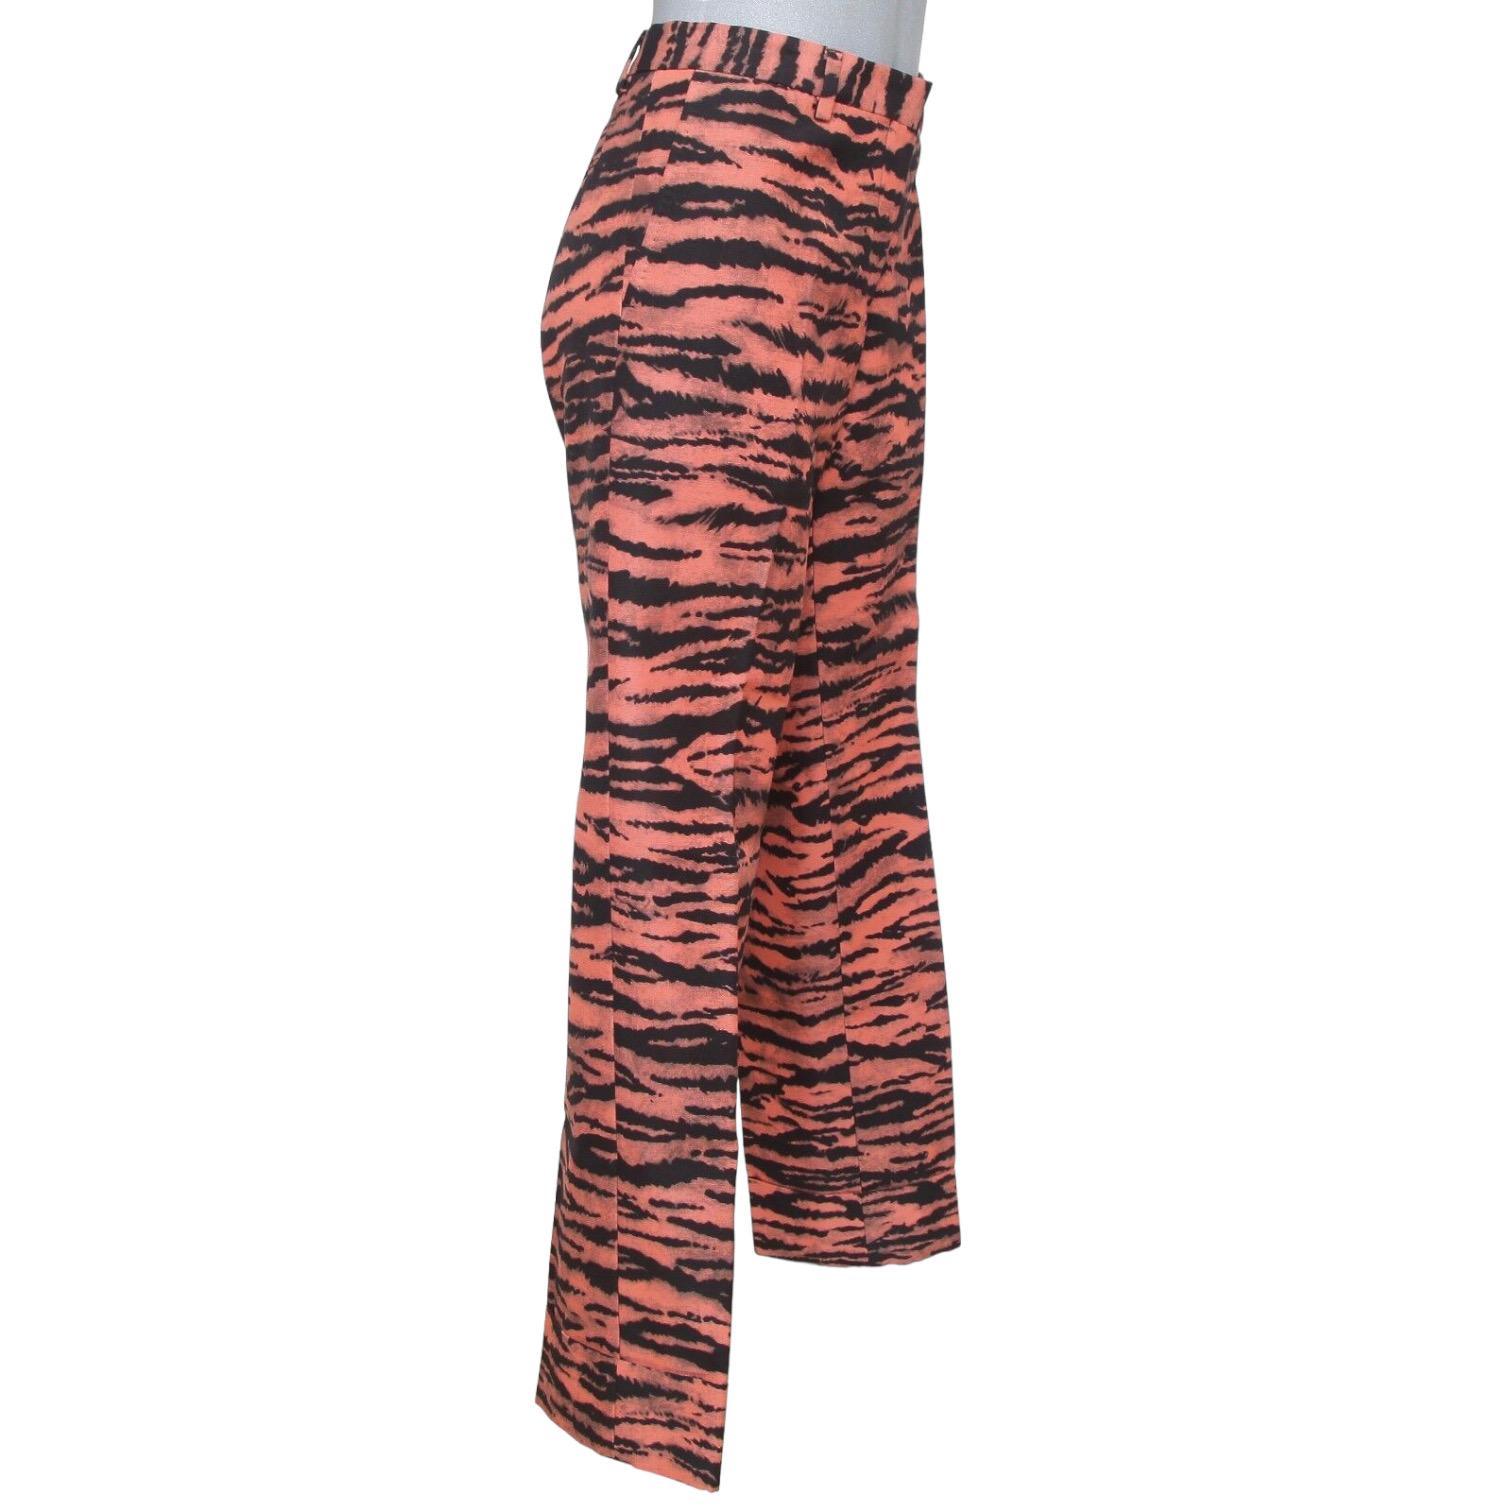 GUARANTEED AUTHENTIC DRIES VAN NOTEN ABSTRACT PRINT PANTS
Retail excluding sales taxes, $660



Details:
• Straight leg pant abstract print in black and peach colors.
• Flat front with signature zipper and hook/button closure.
• Dual front